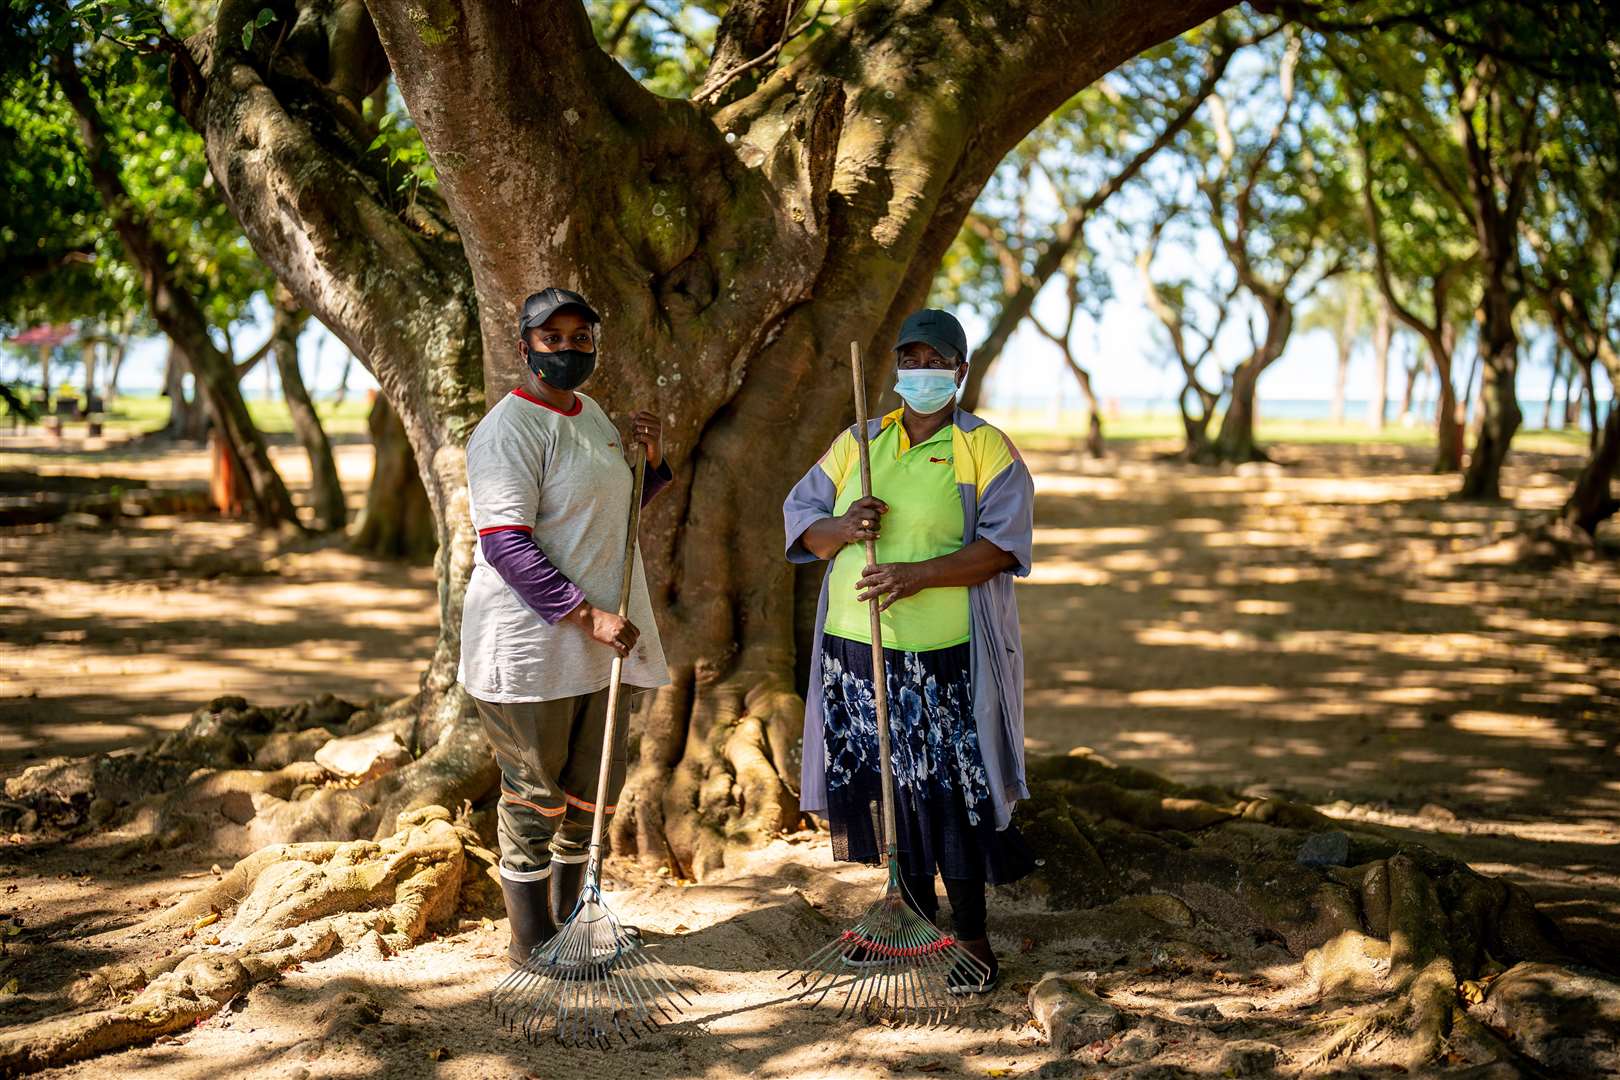 Cleaners wear face masks, in accordance with government guidelines, as they take a break under a tree while clearing litter in a park in Mauritius (Ben Birchall/PA)